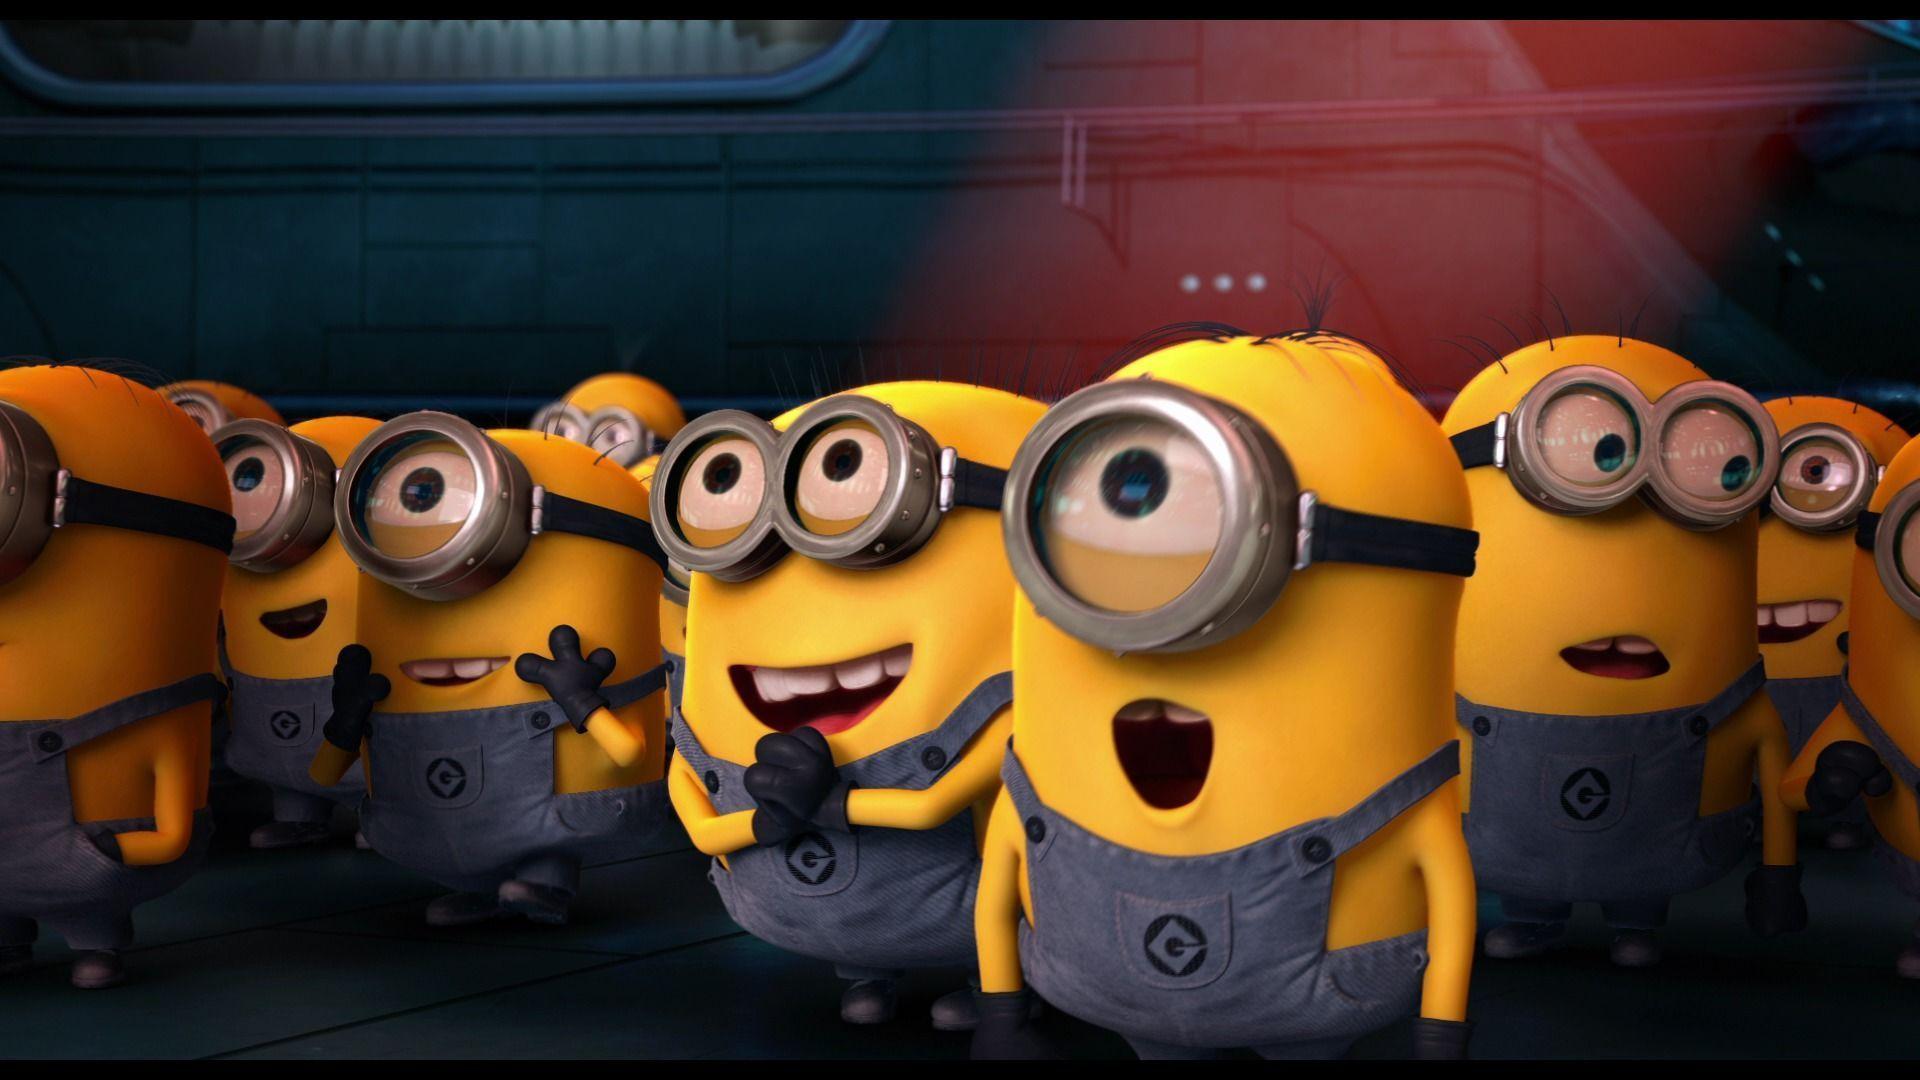 Minion Wallpapers 1920x1080 - Wallpaper Cave